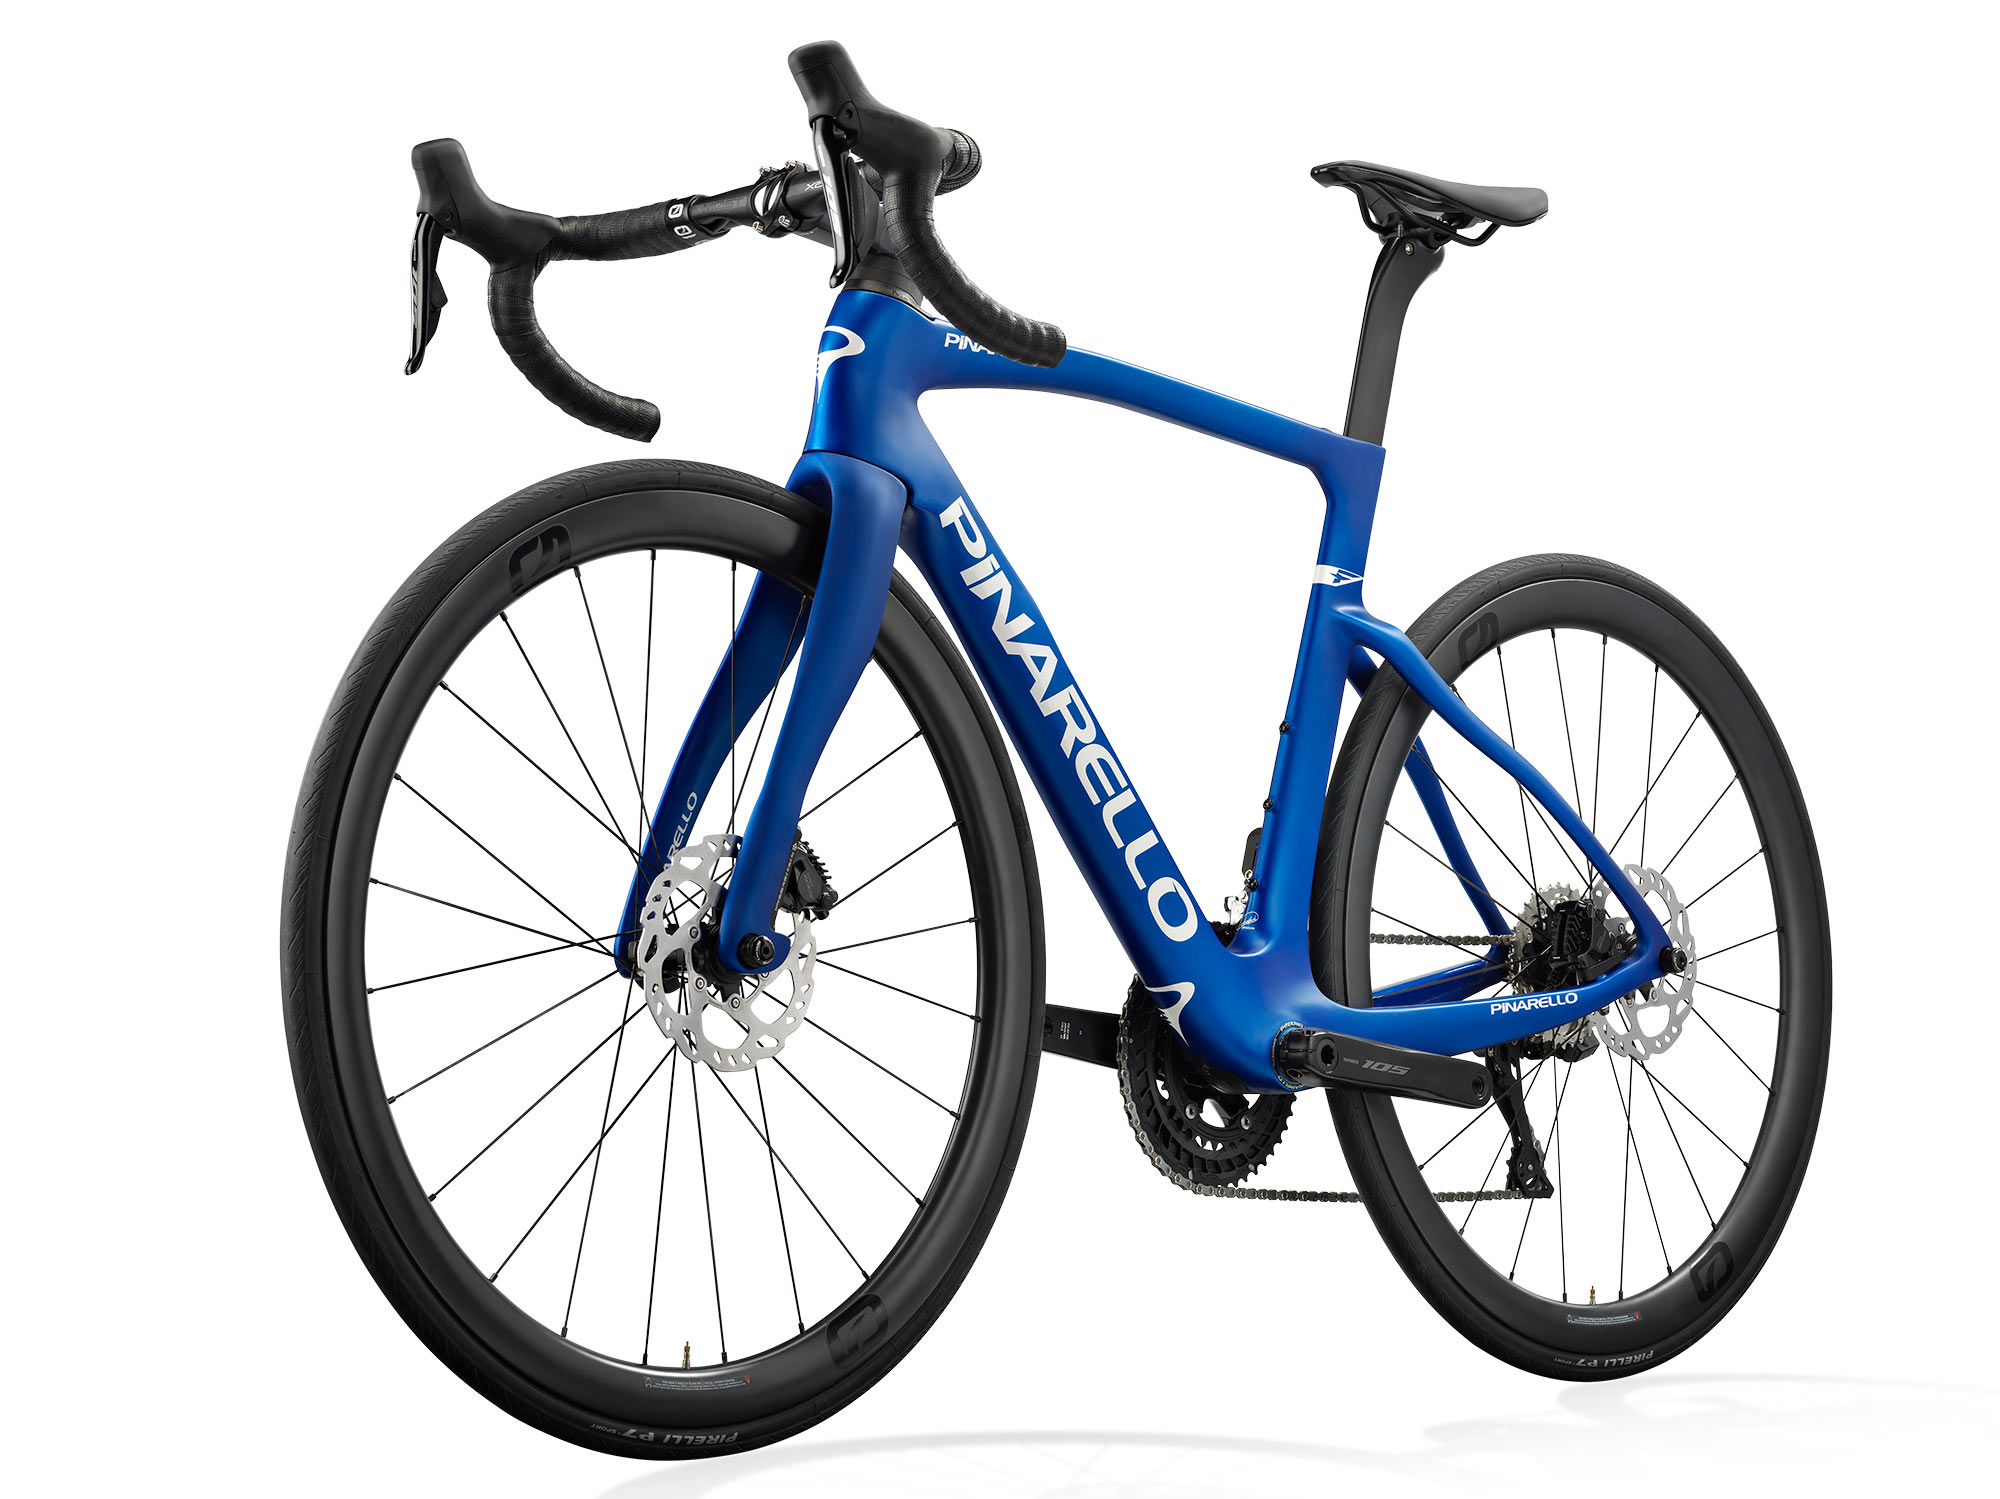 Pinarello replaces Prince with new F-Series race bikes – a baby